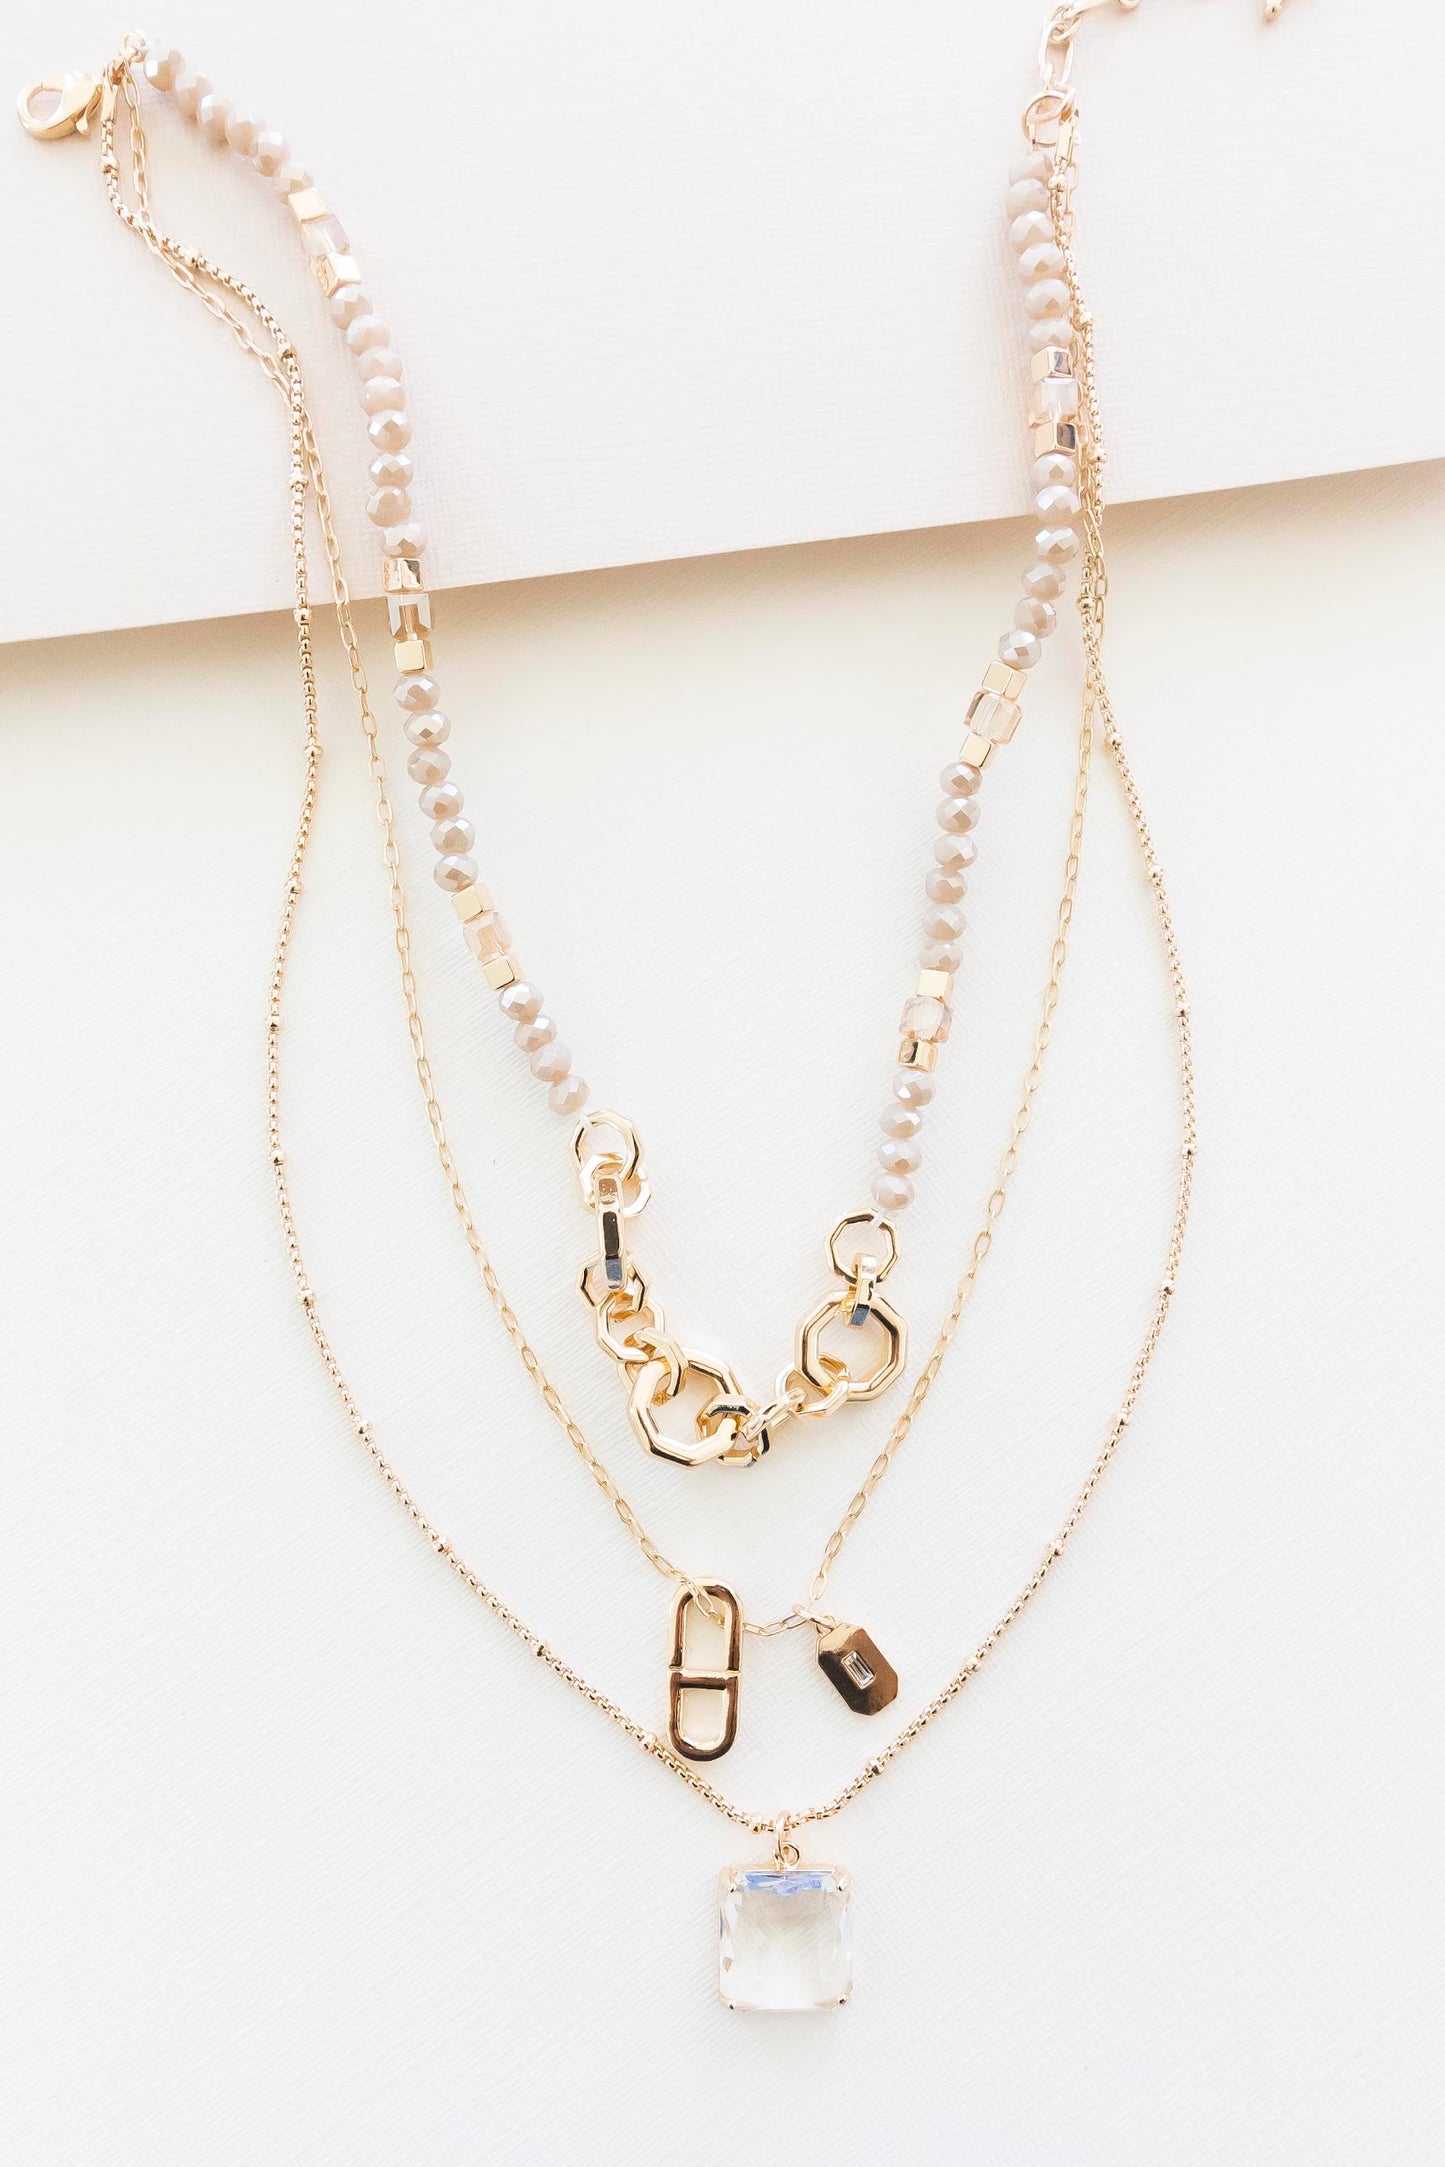 Harper Gold Layering Necklace | Dainty Gold Chains with Charm Details | Delicate Layered Necklace | Clear Crystal Pendant